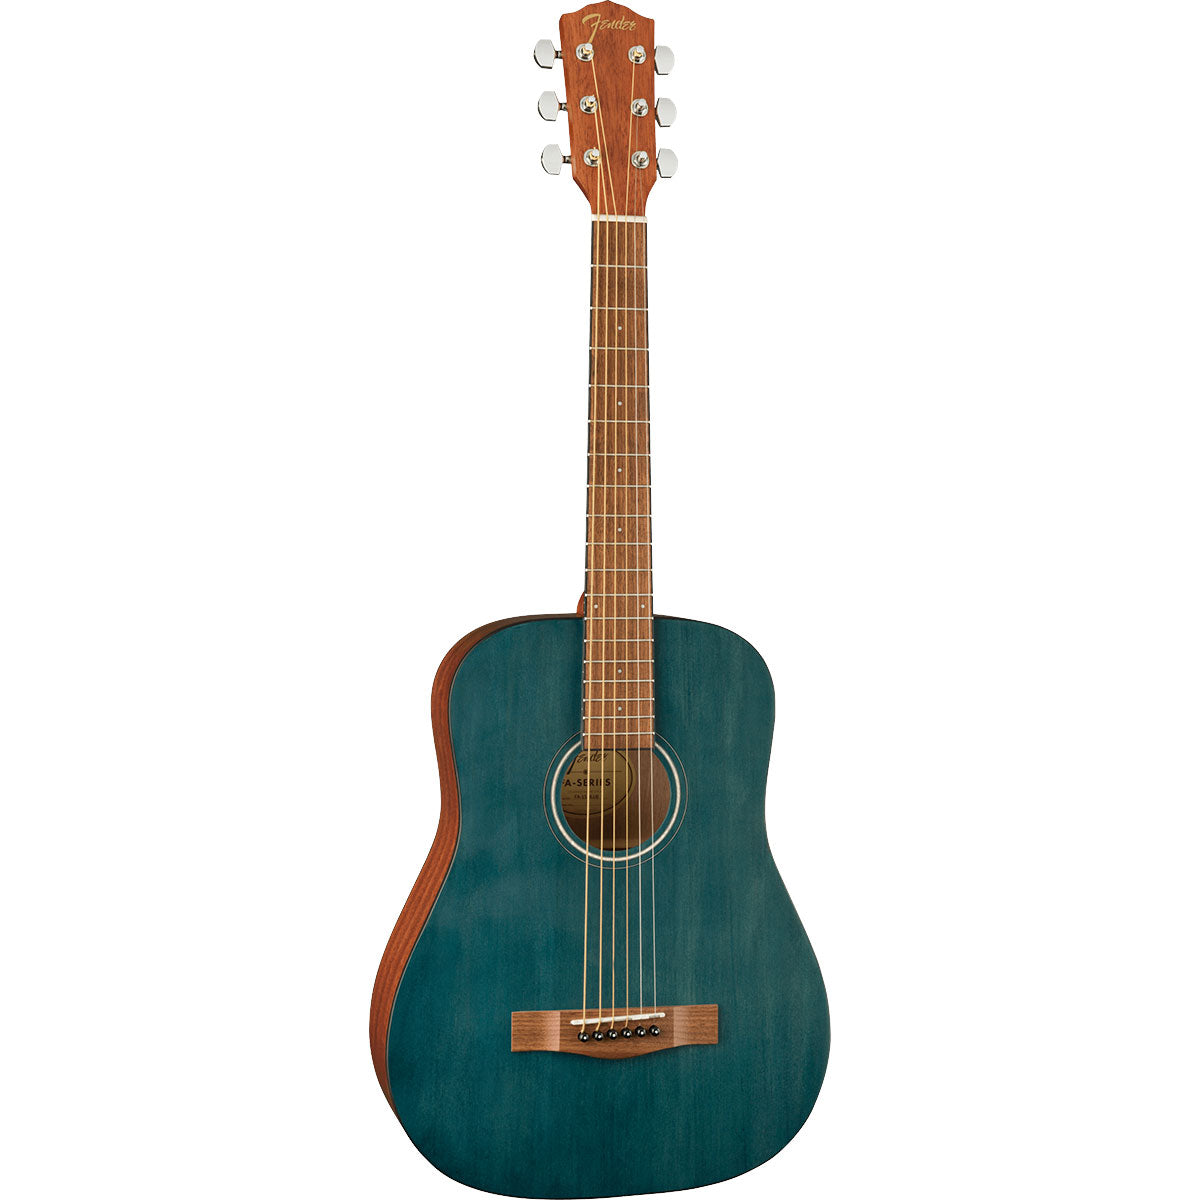 Perspective view of Fender FA-15 3/4 Steel Acoustic Guitar - Blue showing top and left side